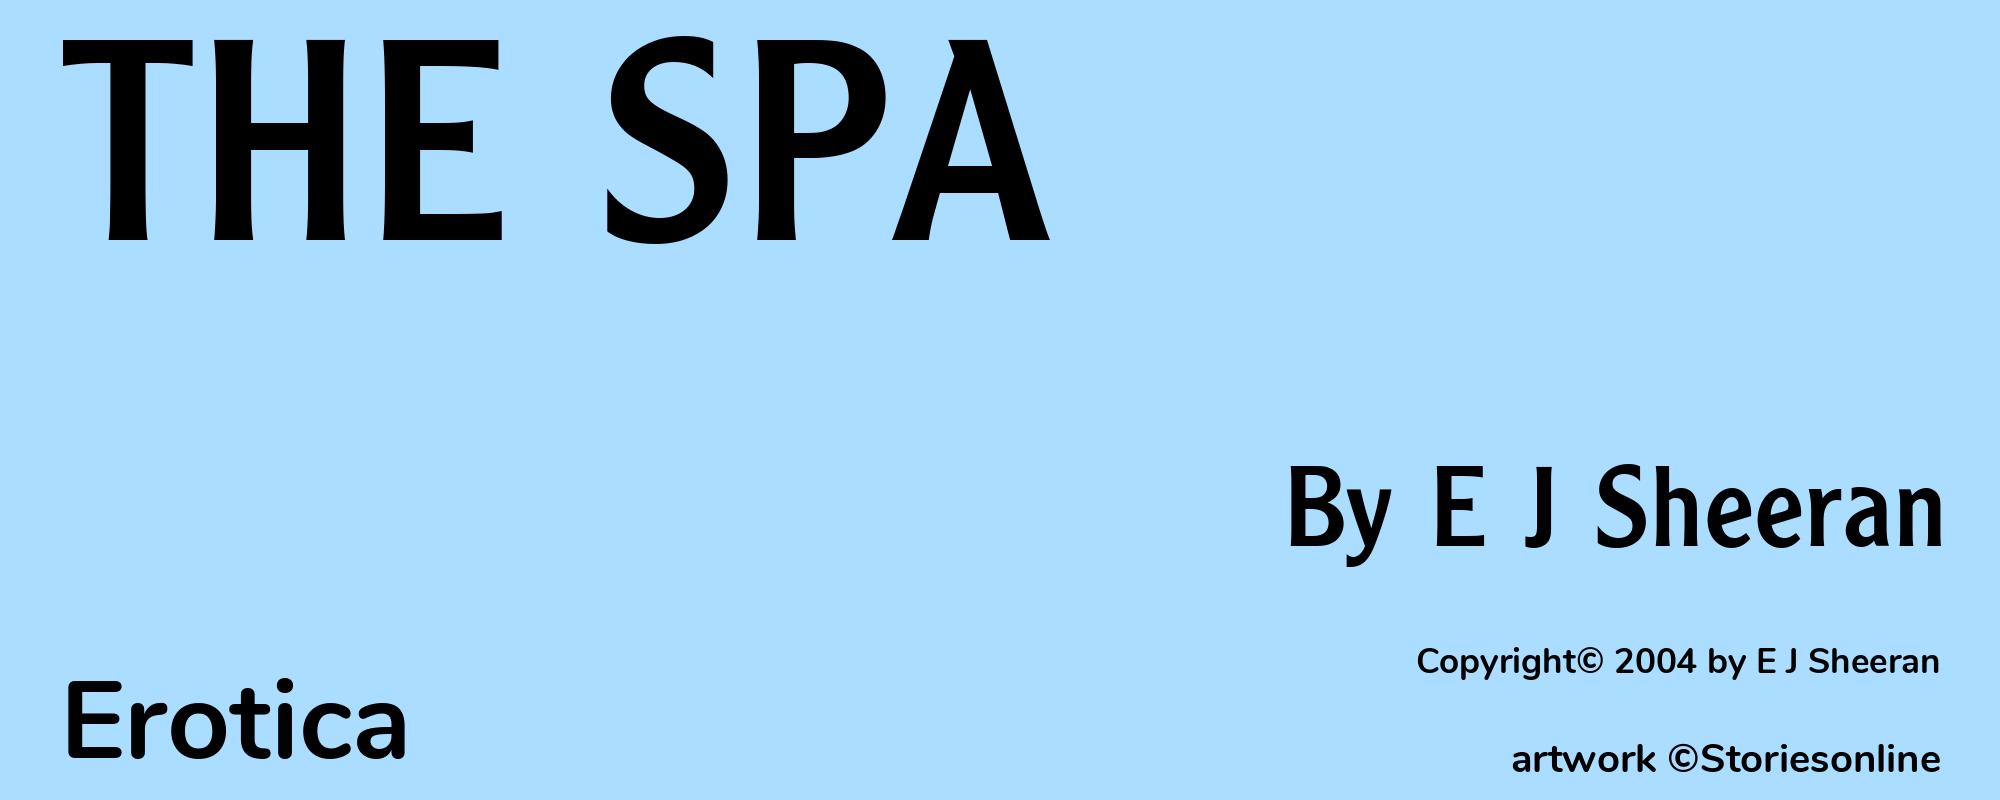 THE SPA - Cover